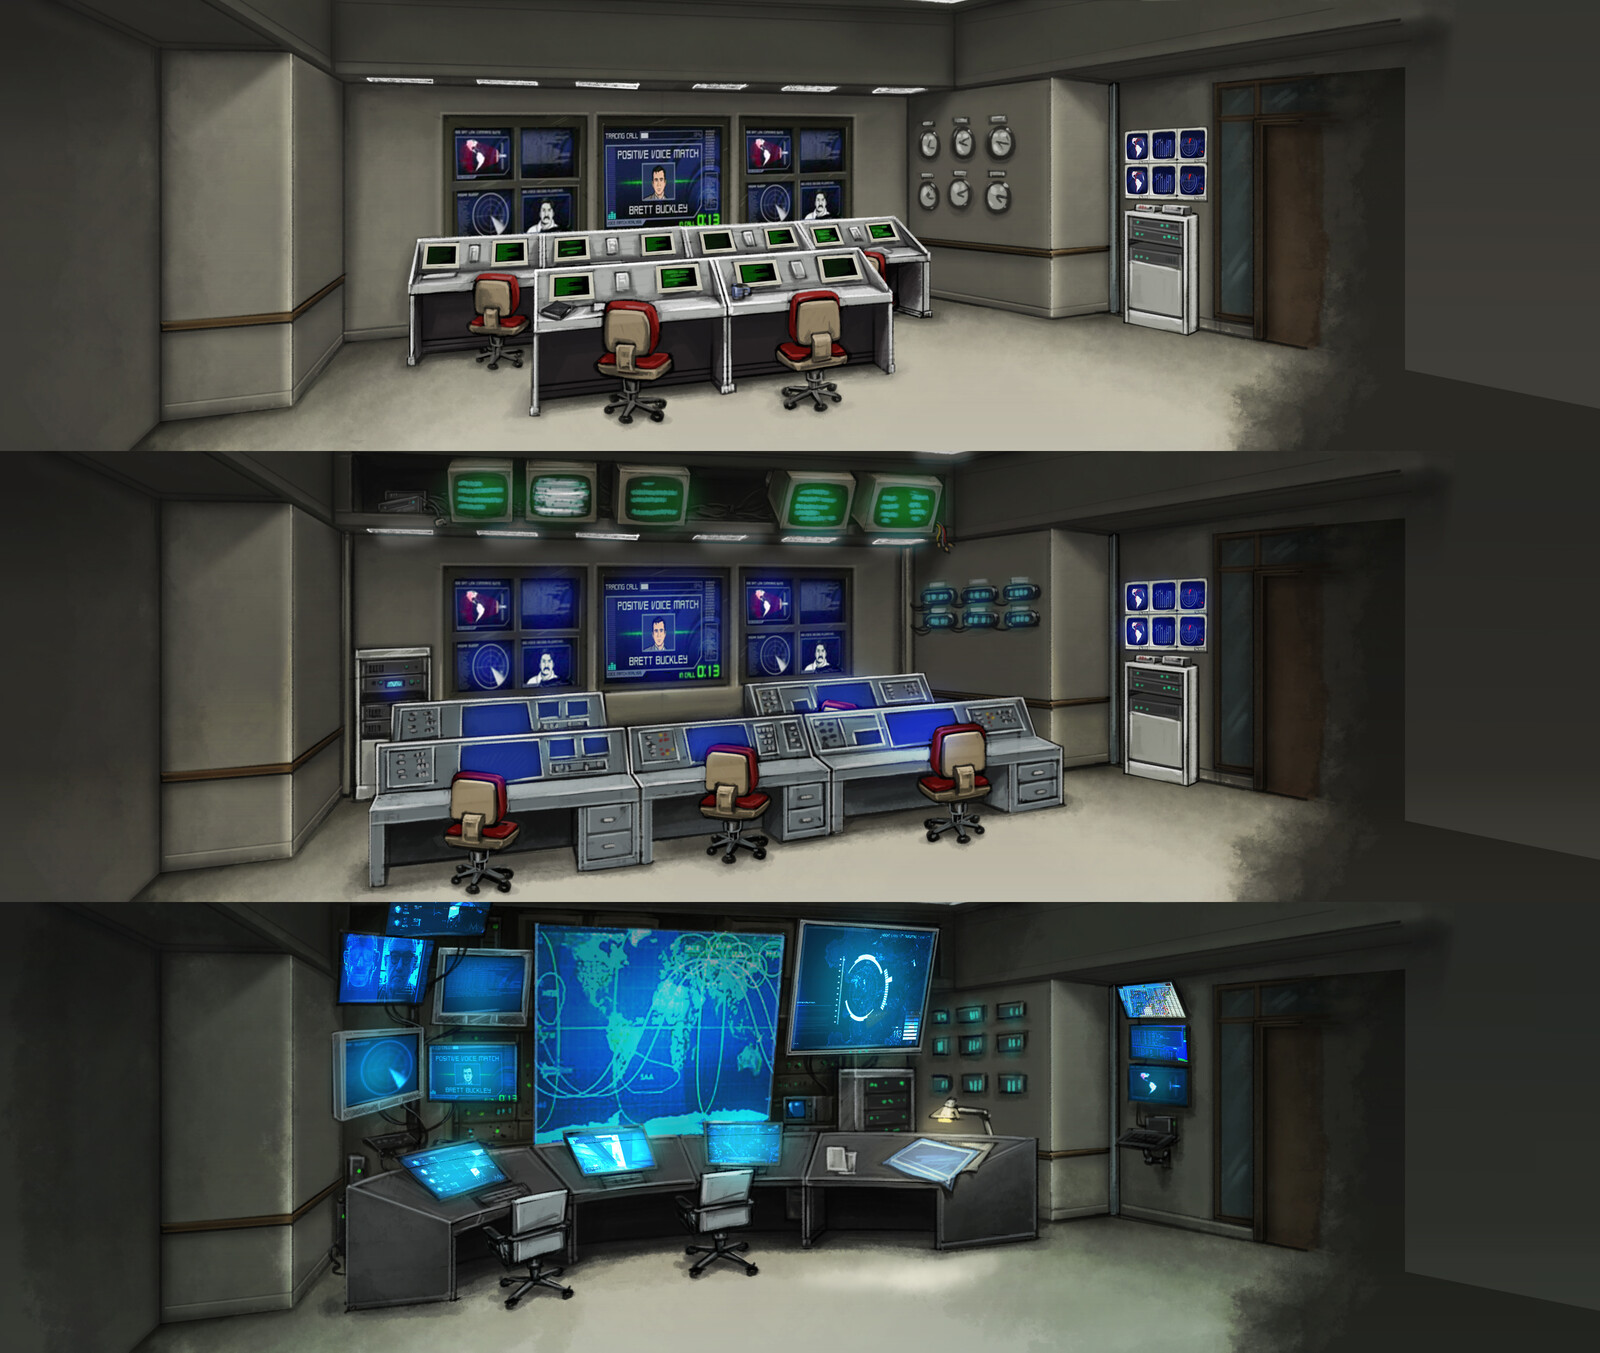 The Situation Room at various stages of upgrade.